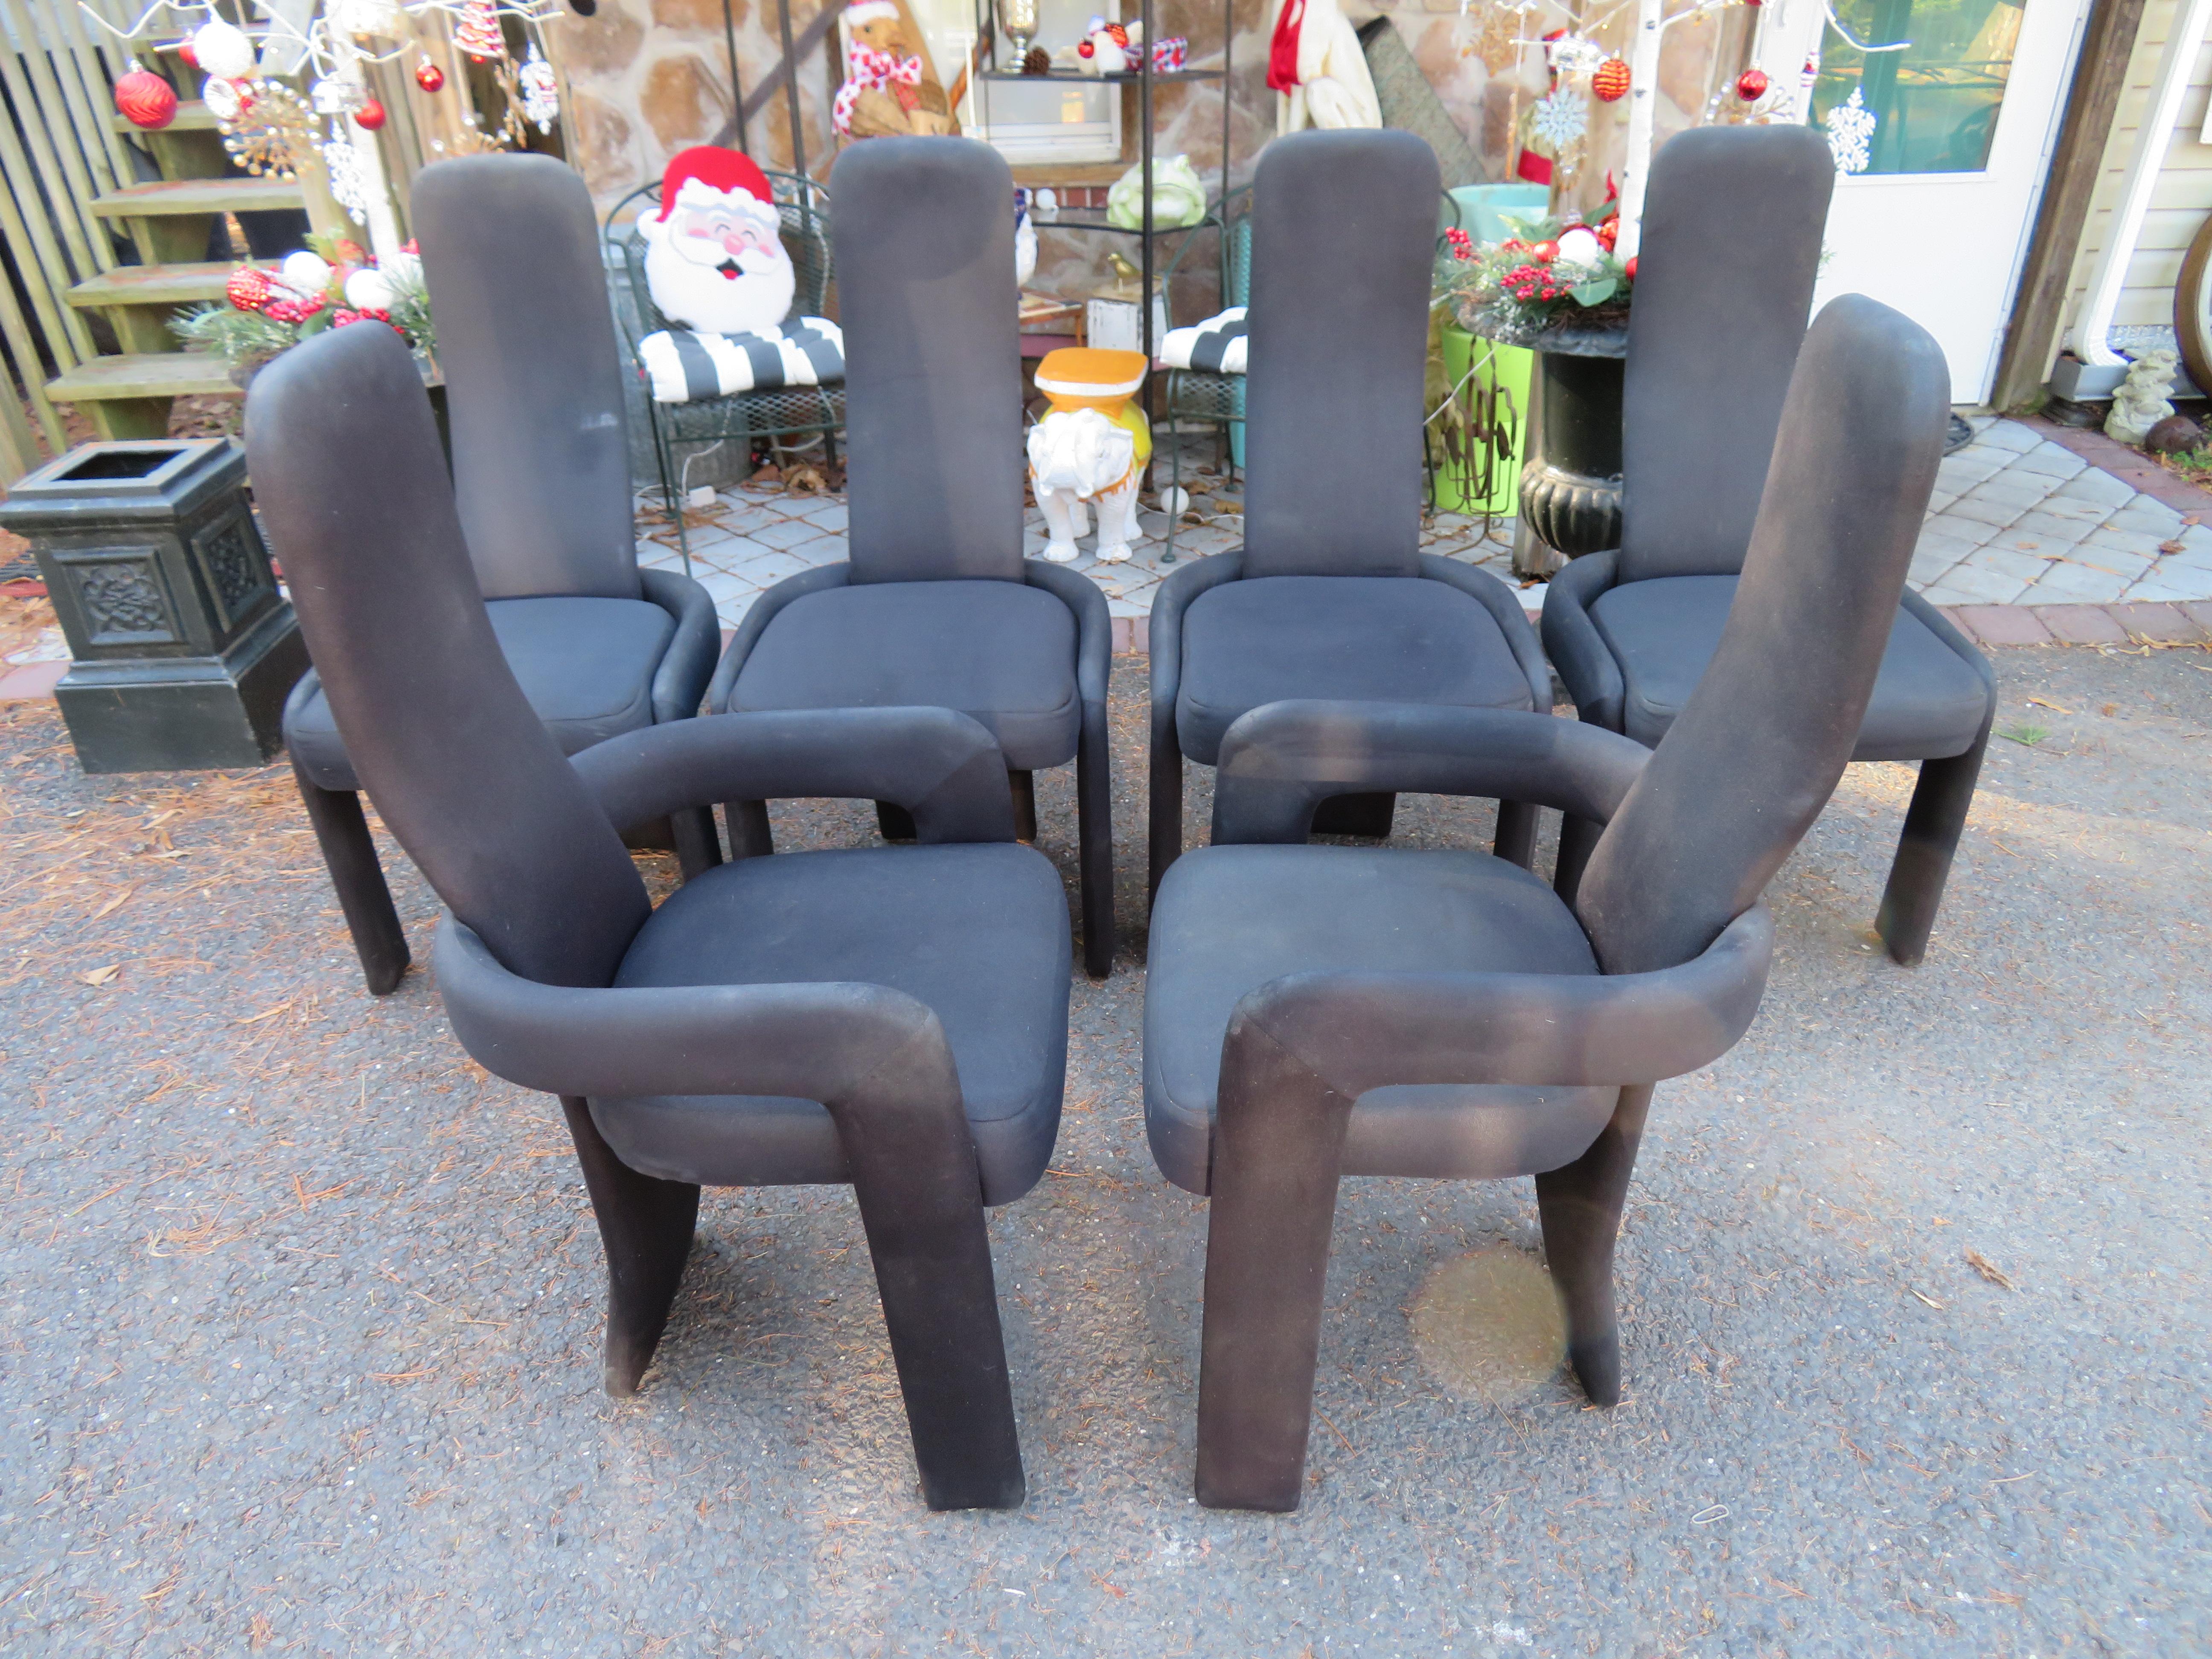 Statuesque set of six Postmodern tall back chairs, four side chairs and two armchairs. They each have tall, narrow backs with rounded top corners and a lumbar curve, extending down to the floor, while the seat is nestled in a curved support that